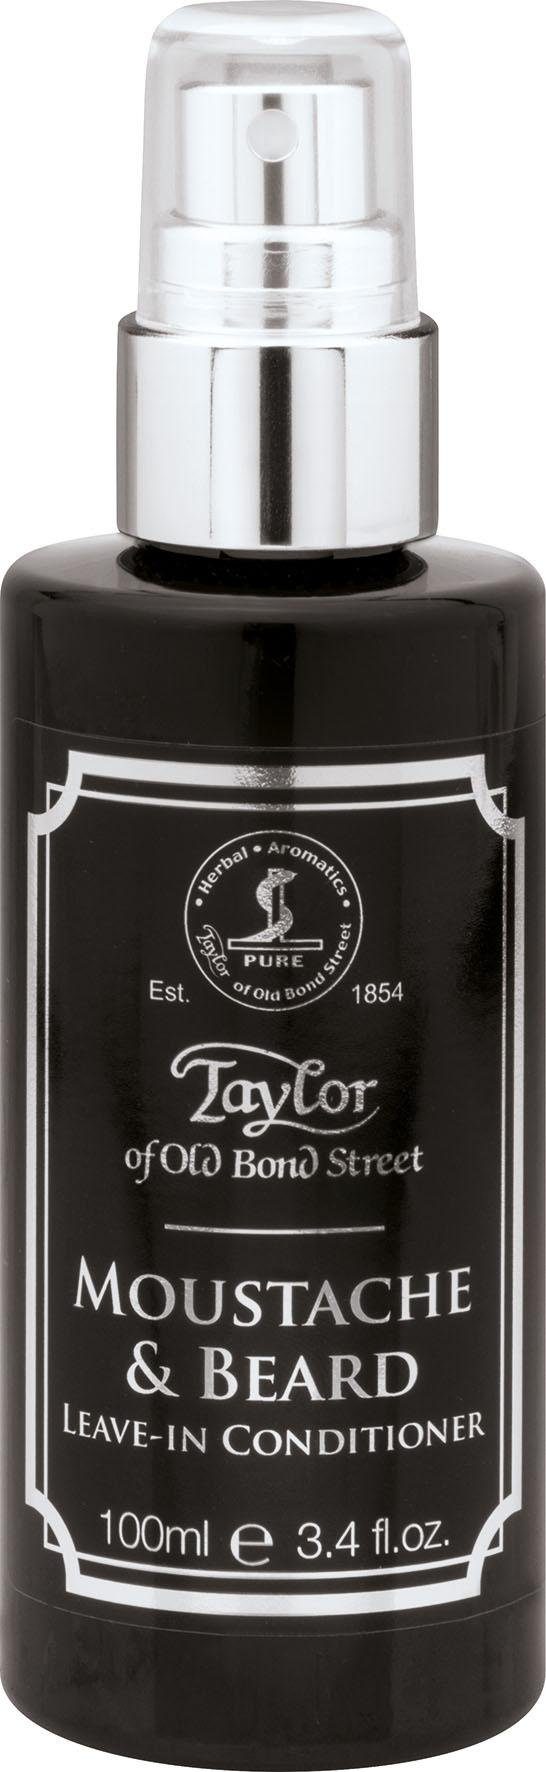 & Moustache Conditioner Leave-In Old Bartconditioner Taylor Beard Bond Street of